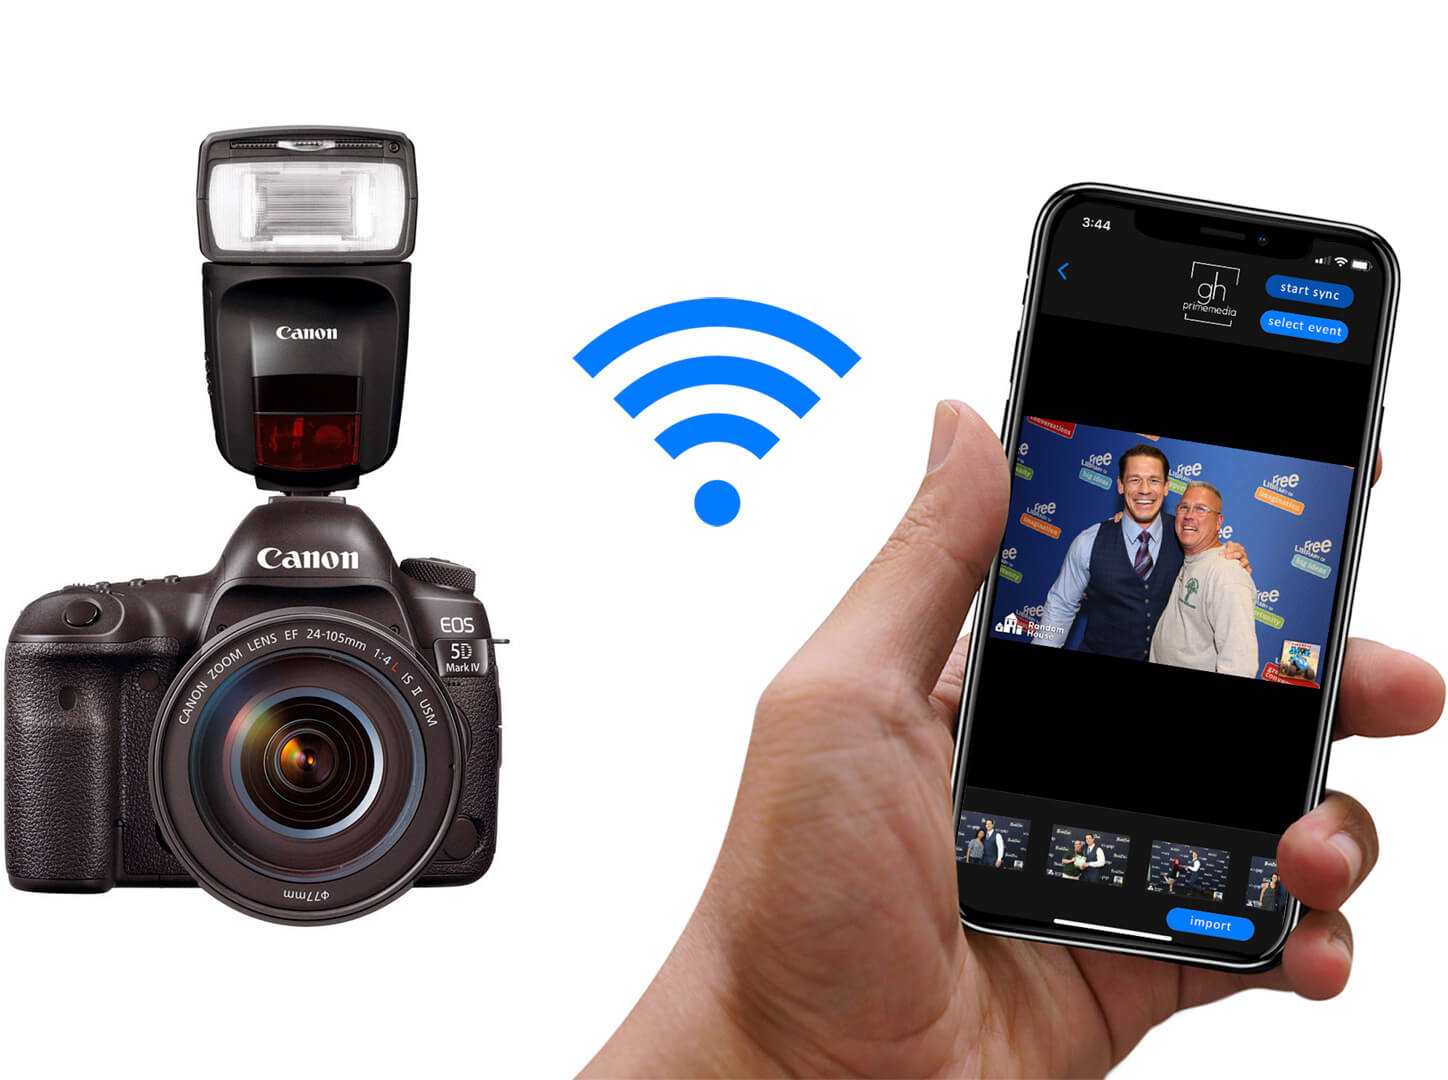 Wireless upload and easy retrieval with Prime Mobile